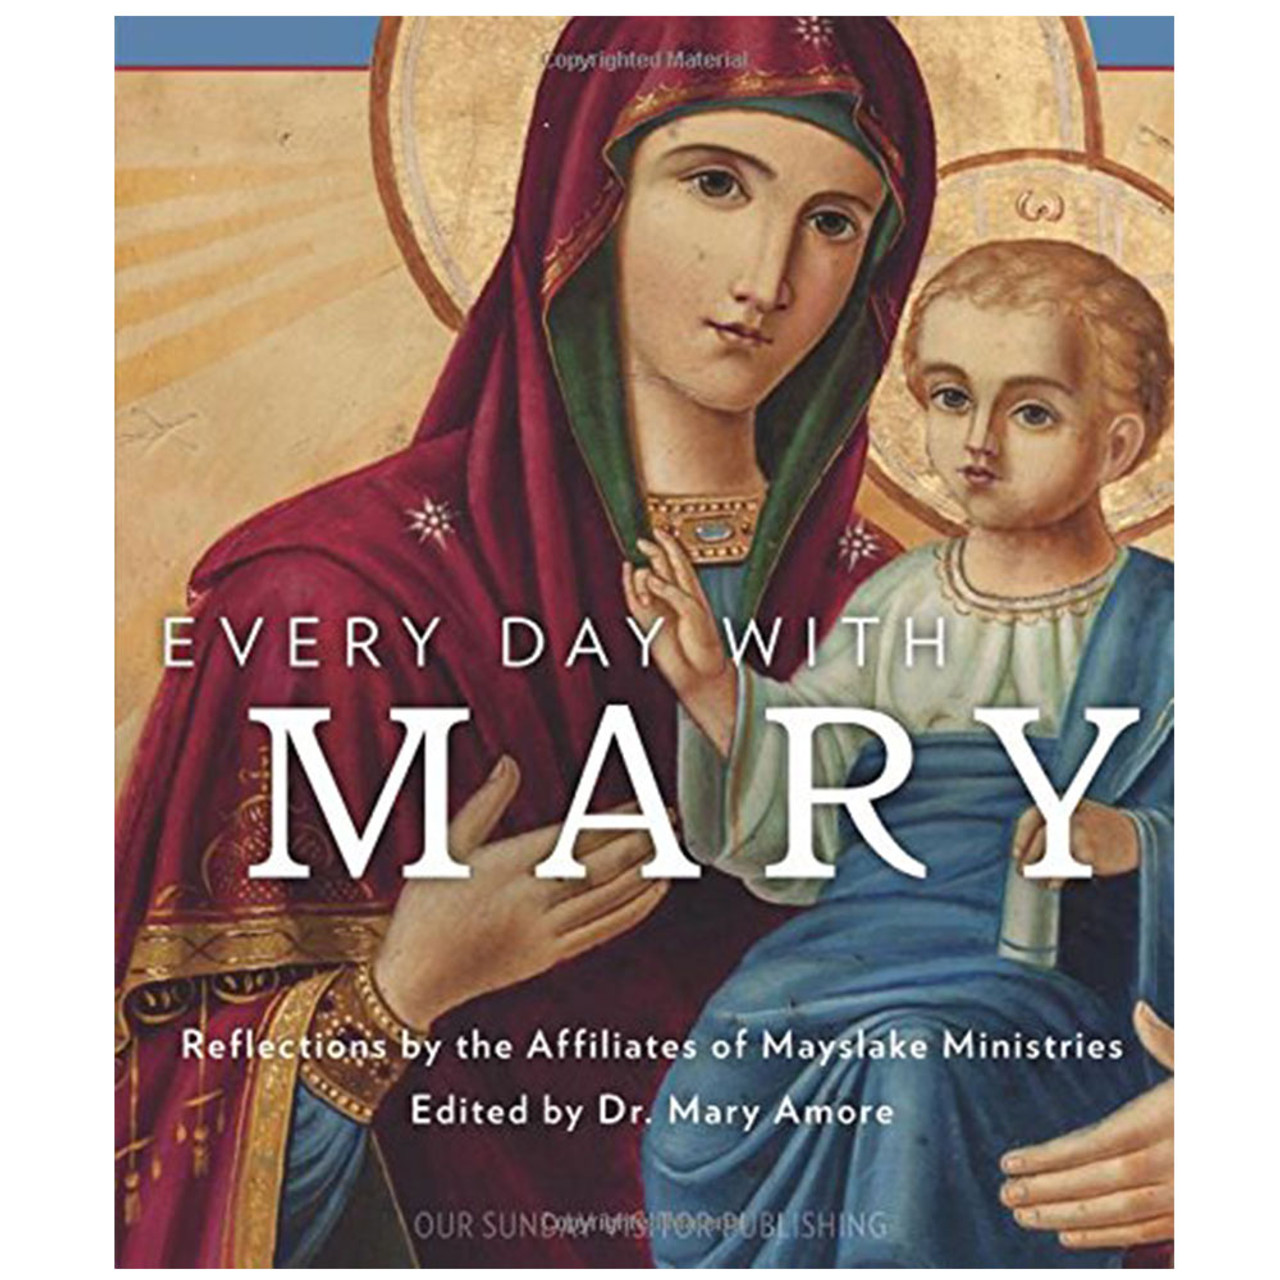 Every Day With Mary by Dr. Mary Amore